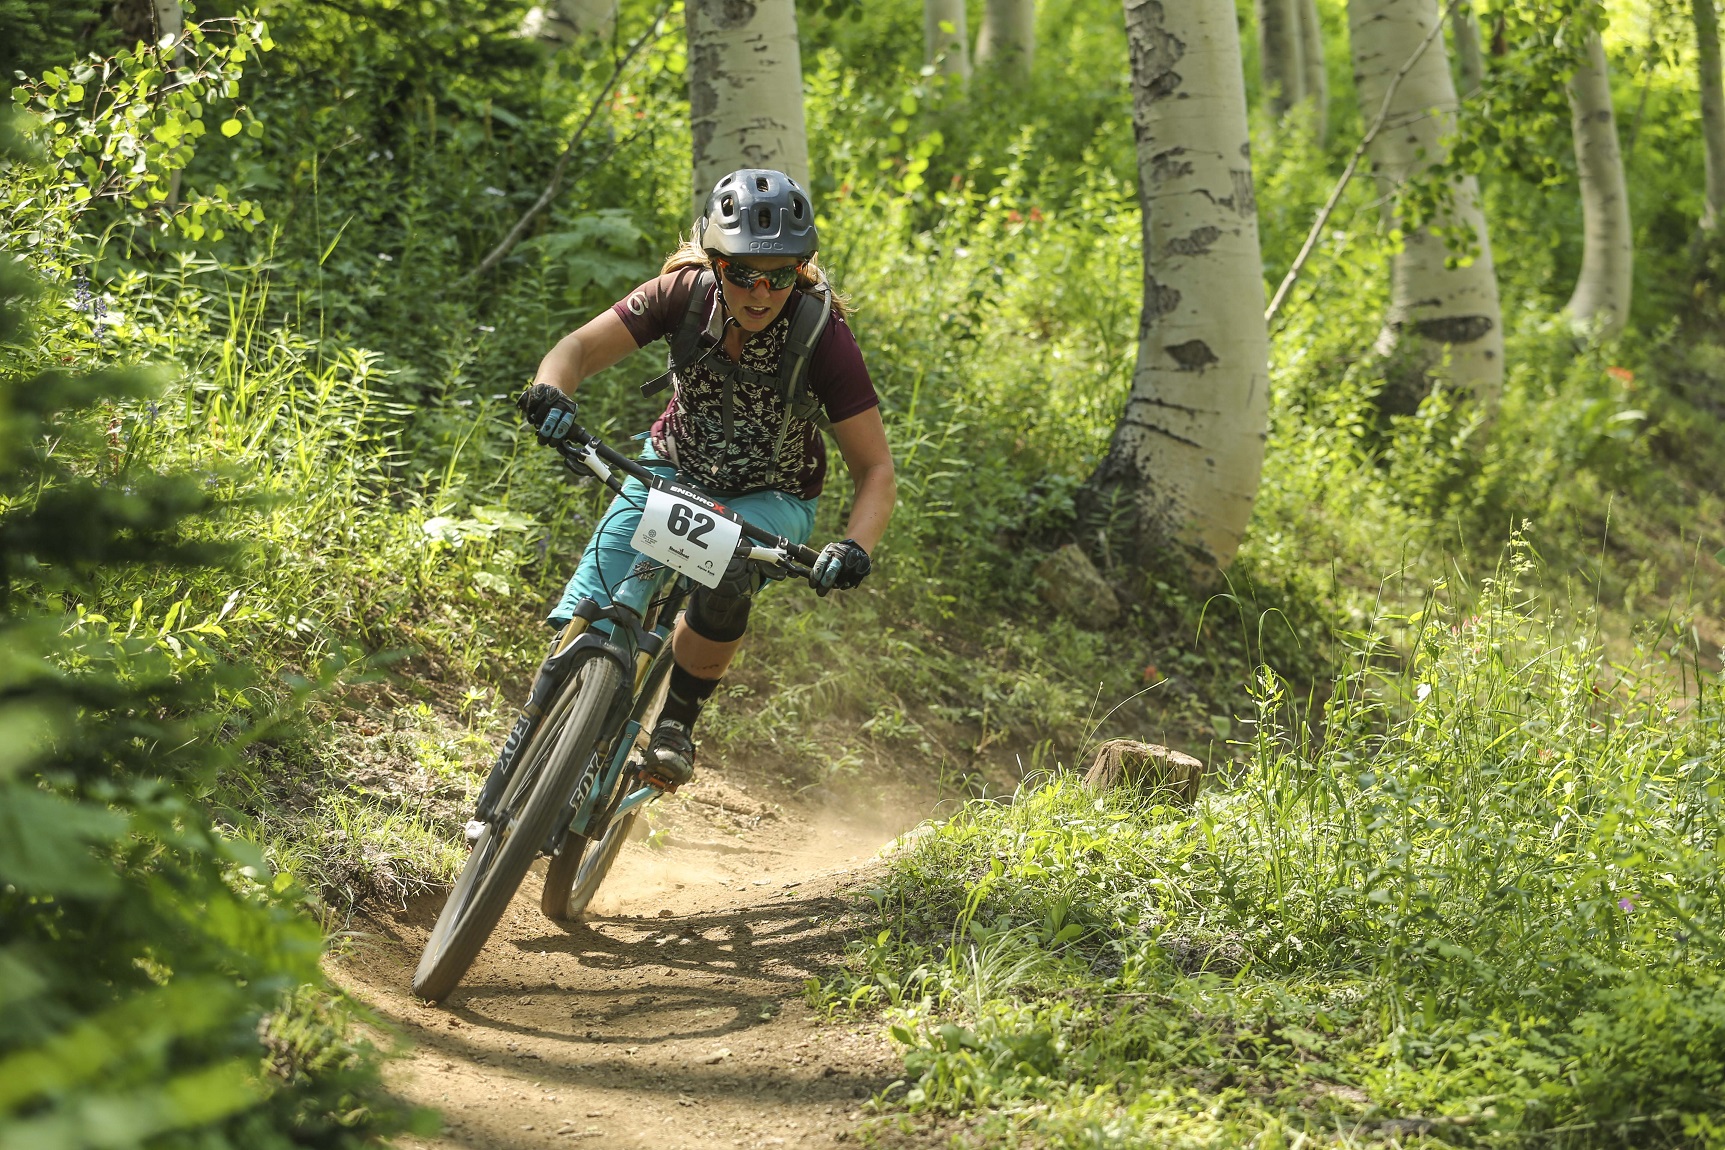 Enter to win one of two vacation packages to Enduro-X in Steamboat